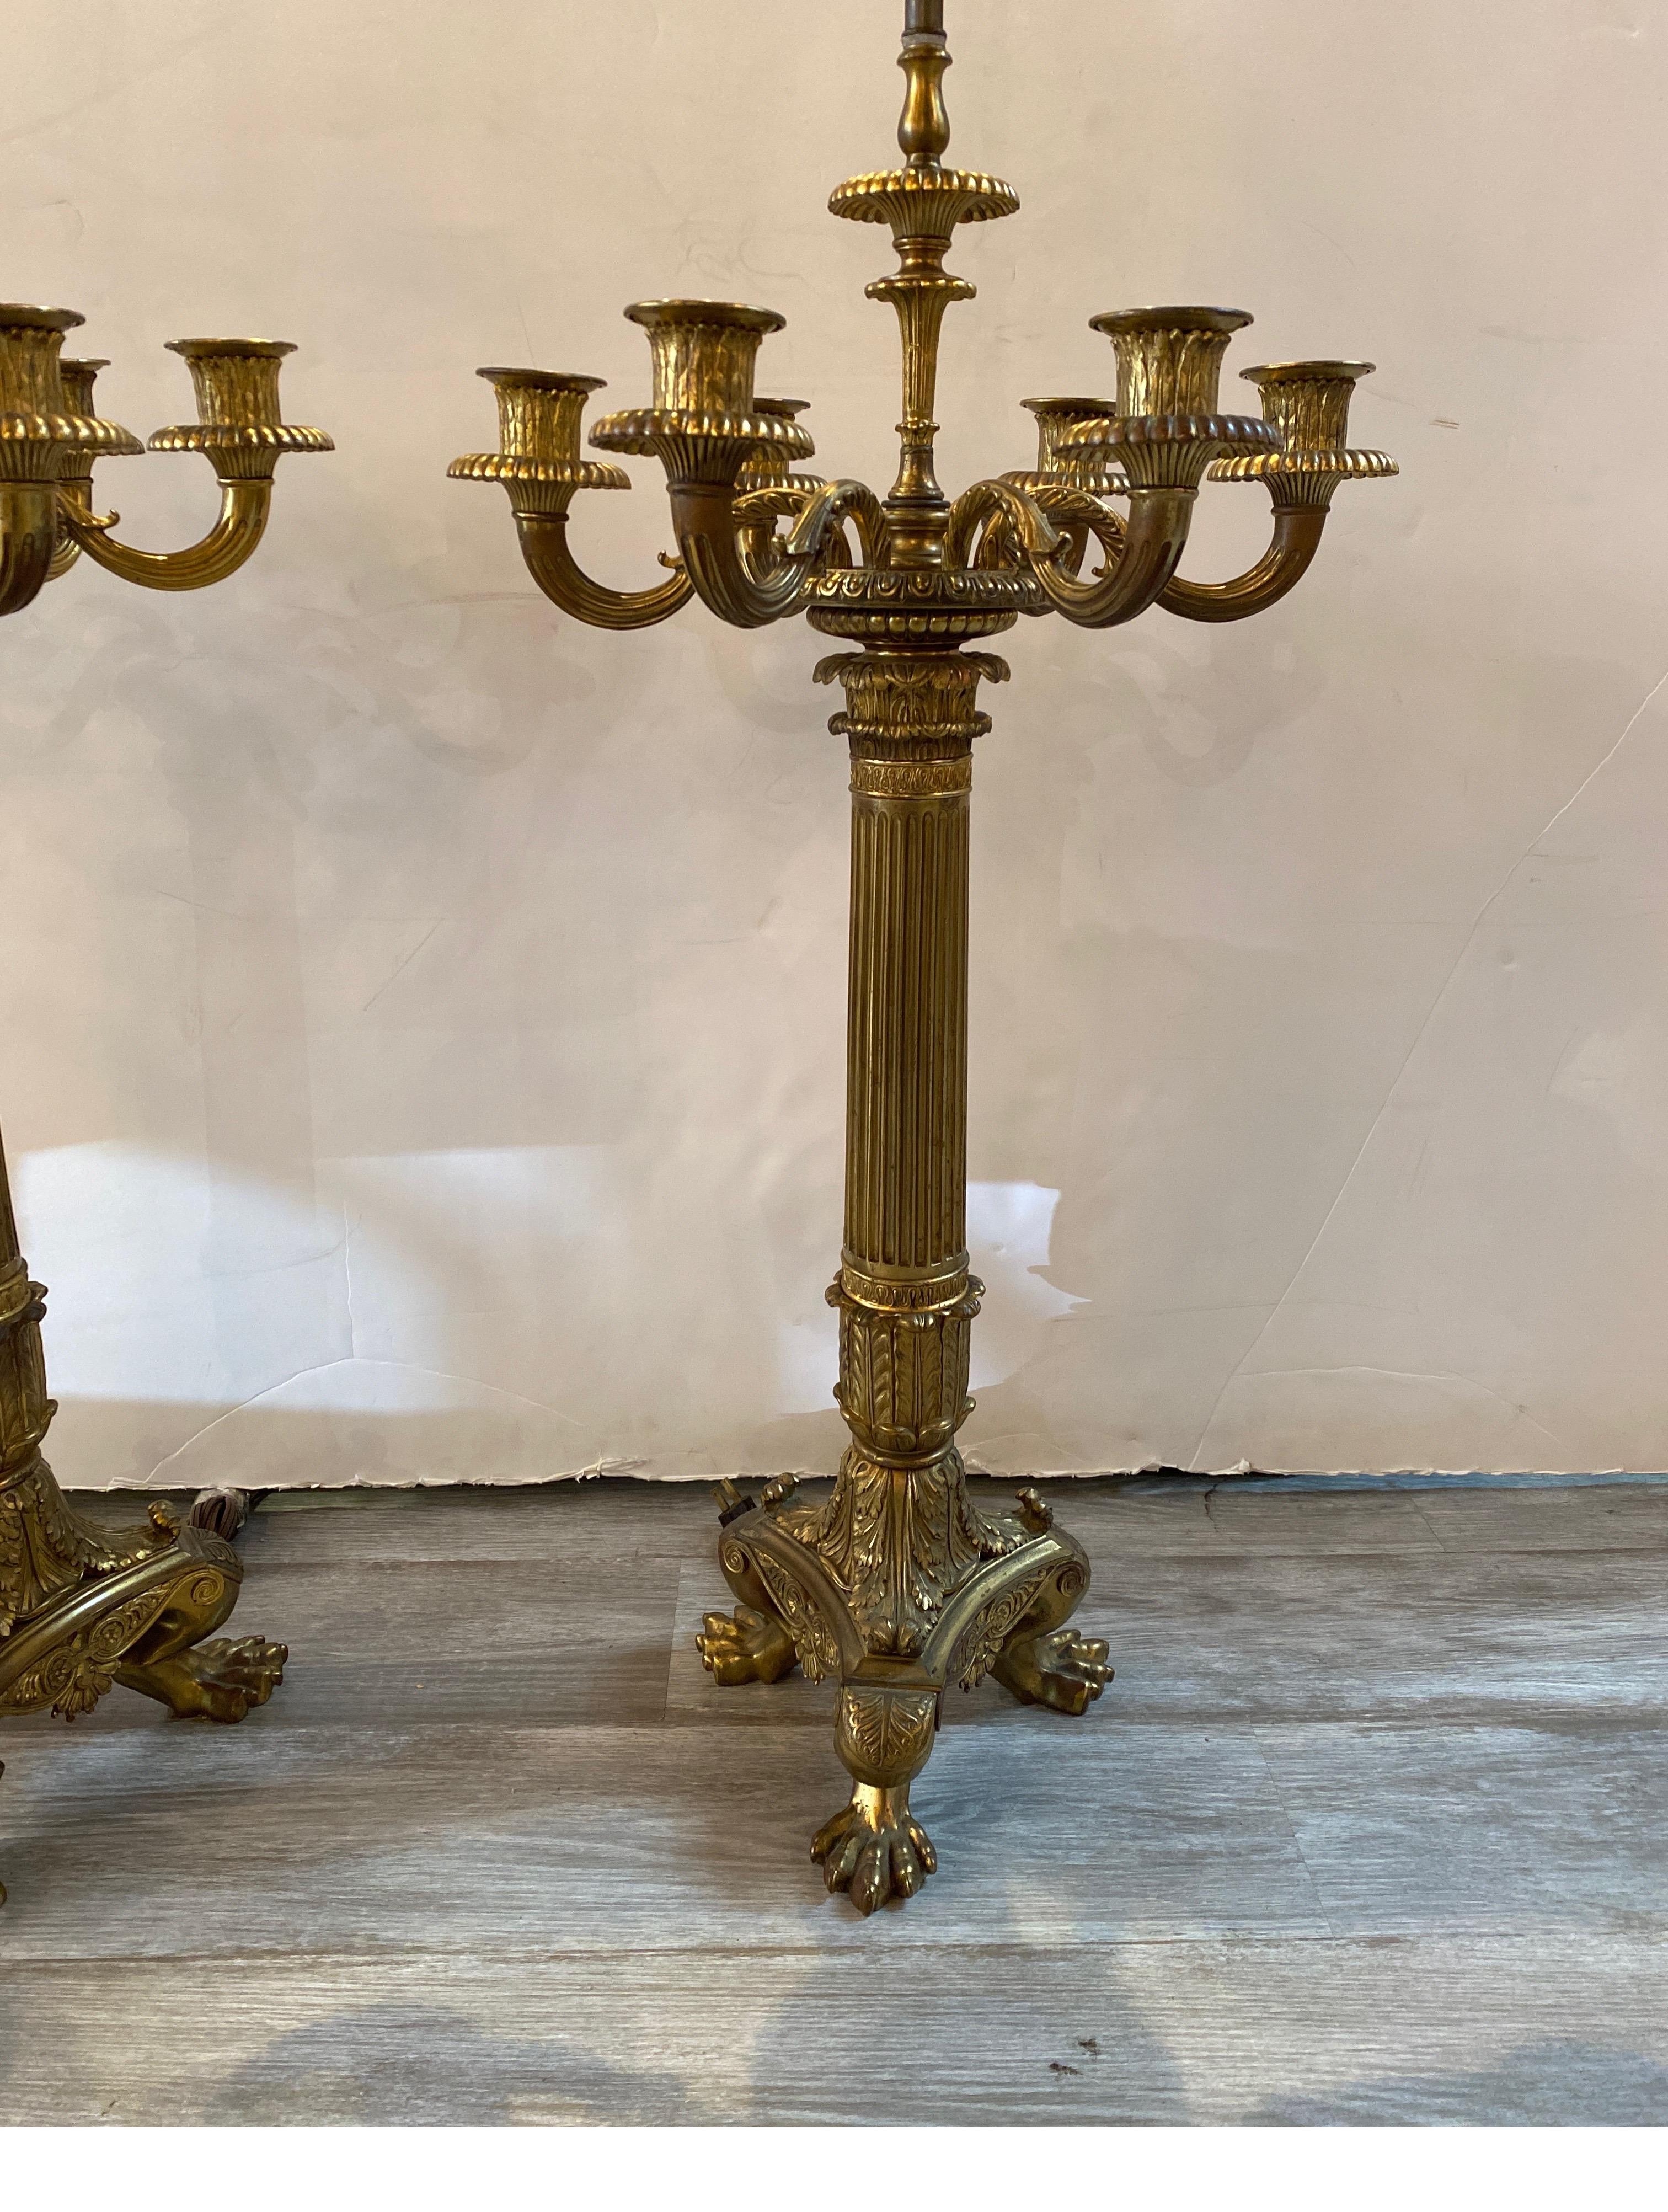 An impressive pair of cast bronze candelabra now as lamps. The Charles X style with six arms and center light with two sockets. The fine candelabra made around 1880, lamped in the 1920's. Fine casting with an aged gilt finish, These lamps are 42